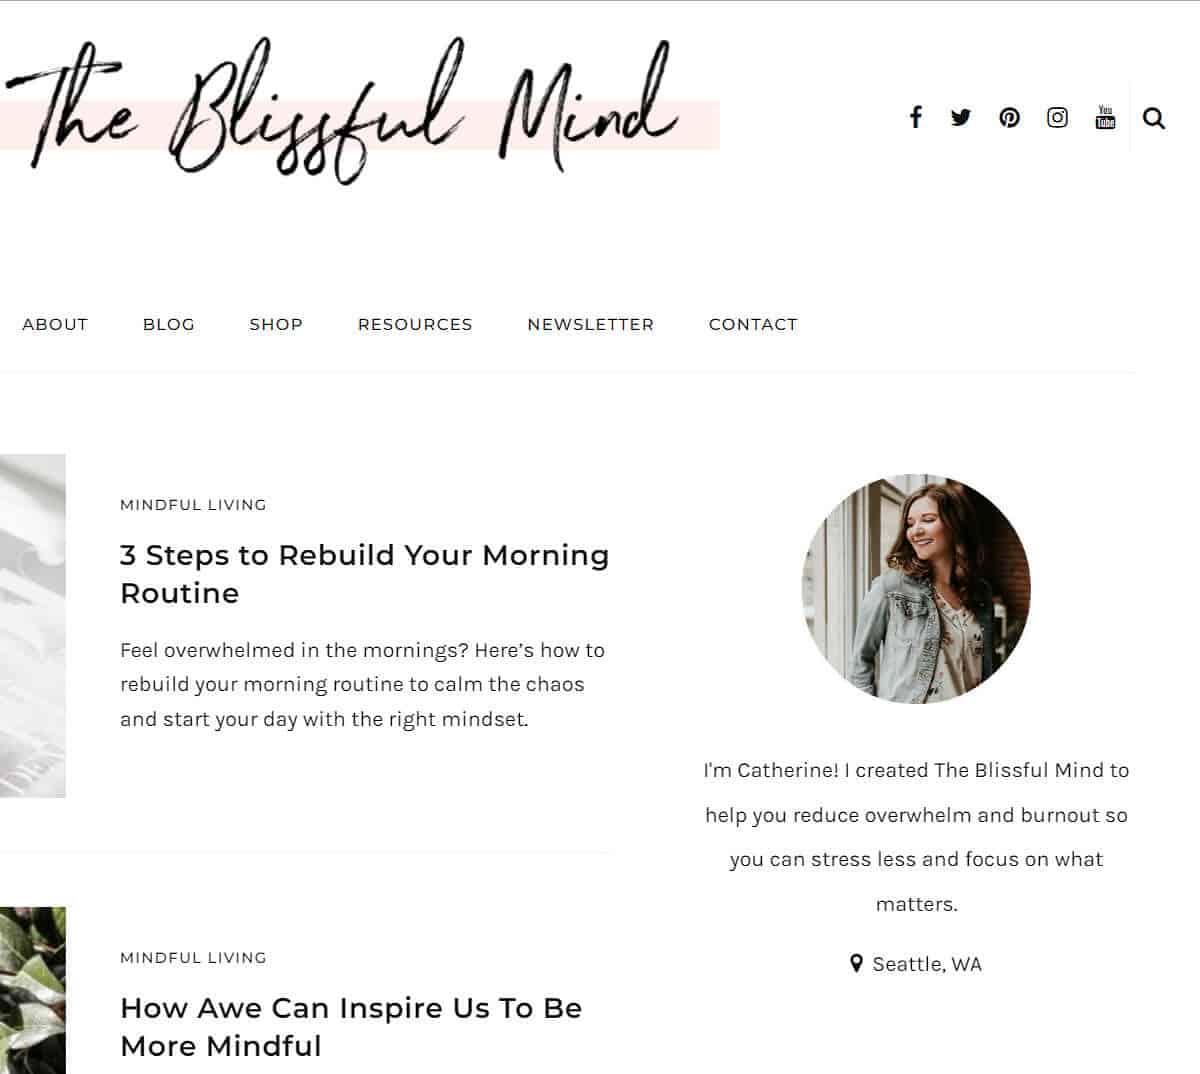 The Blissful Mind Blog